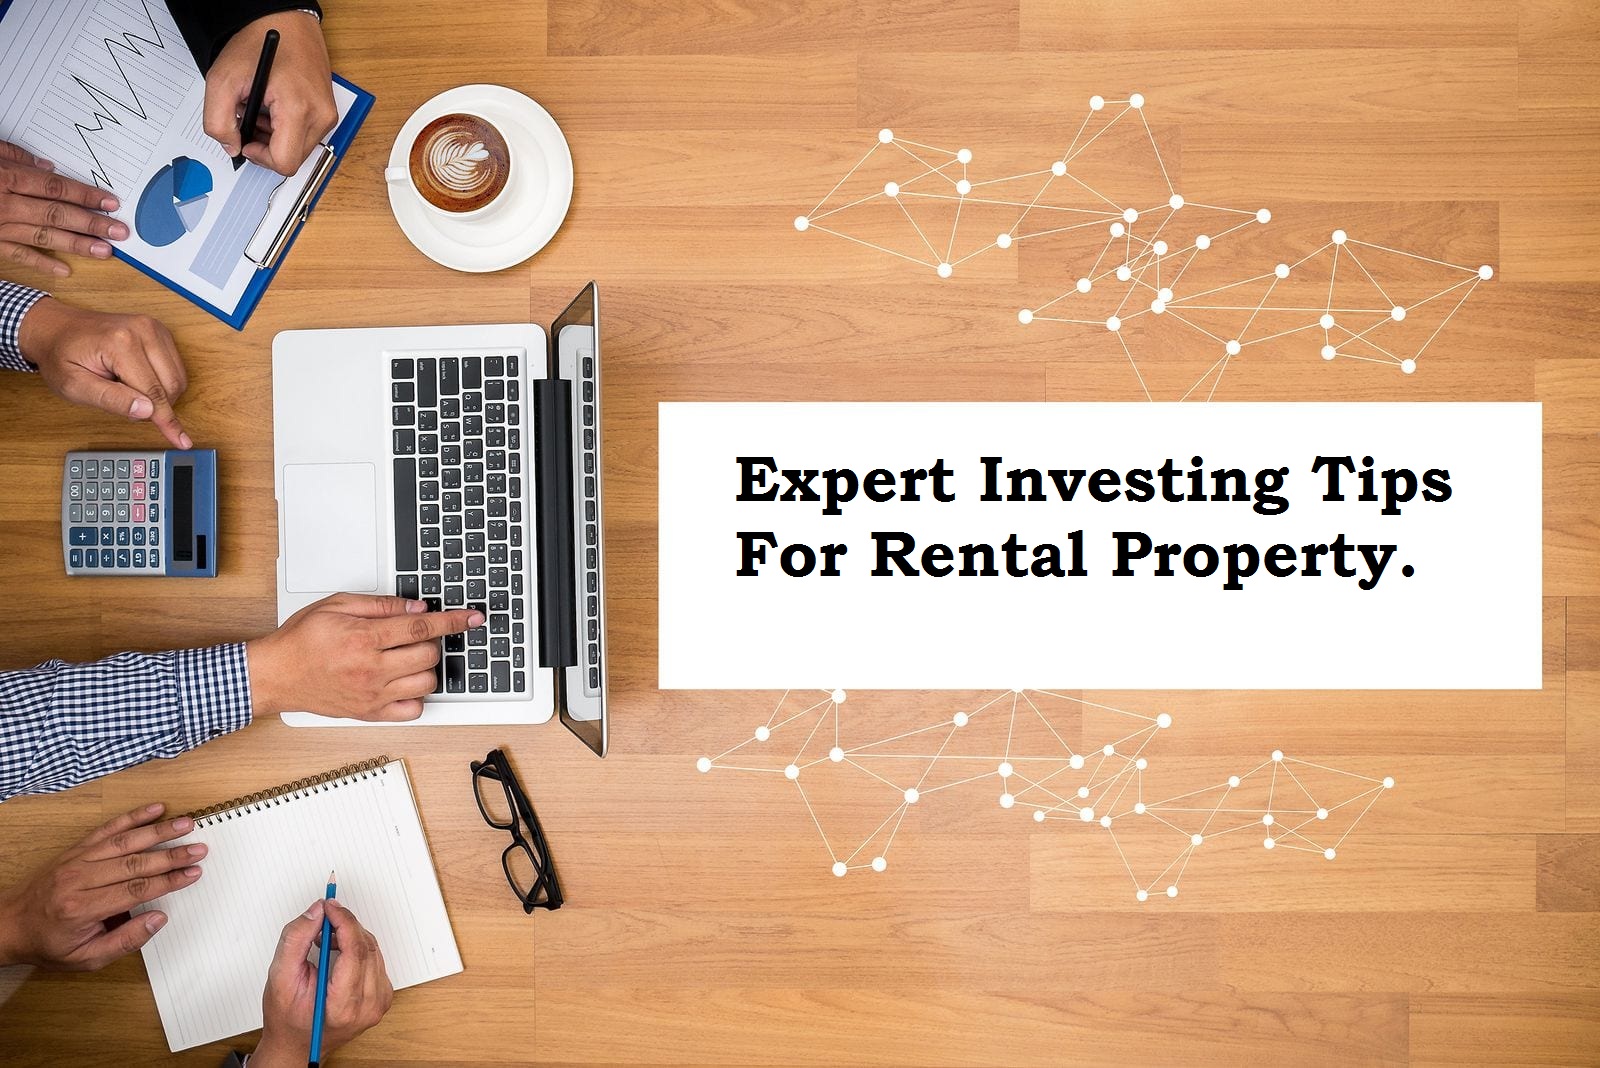 Investing tips for your rental property